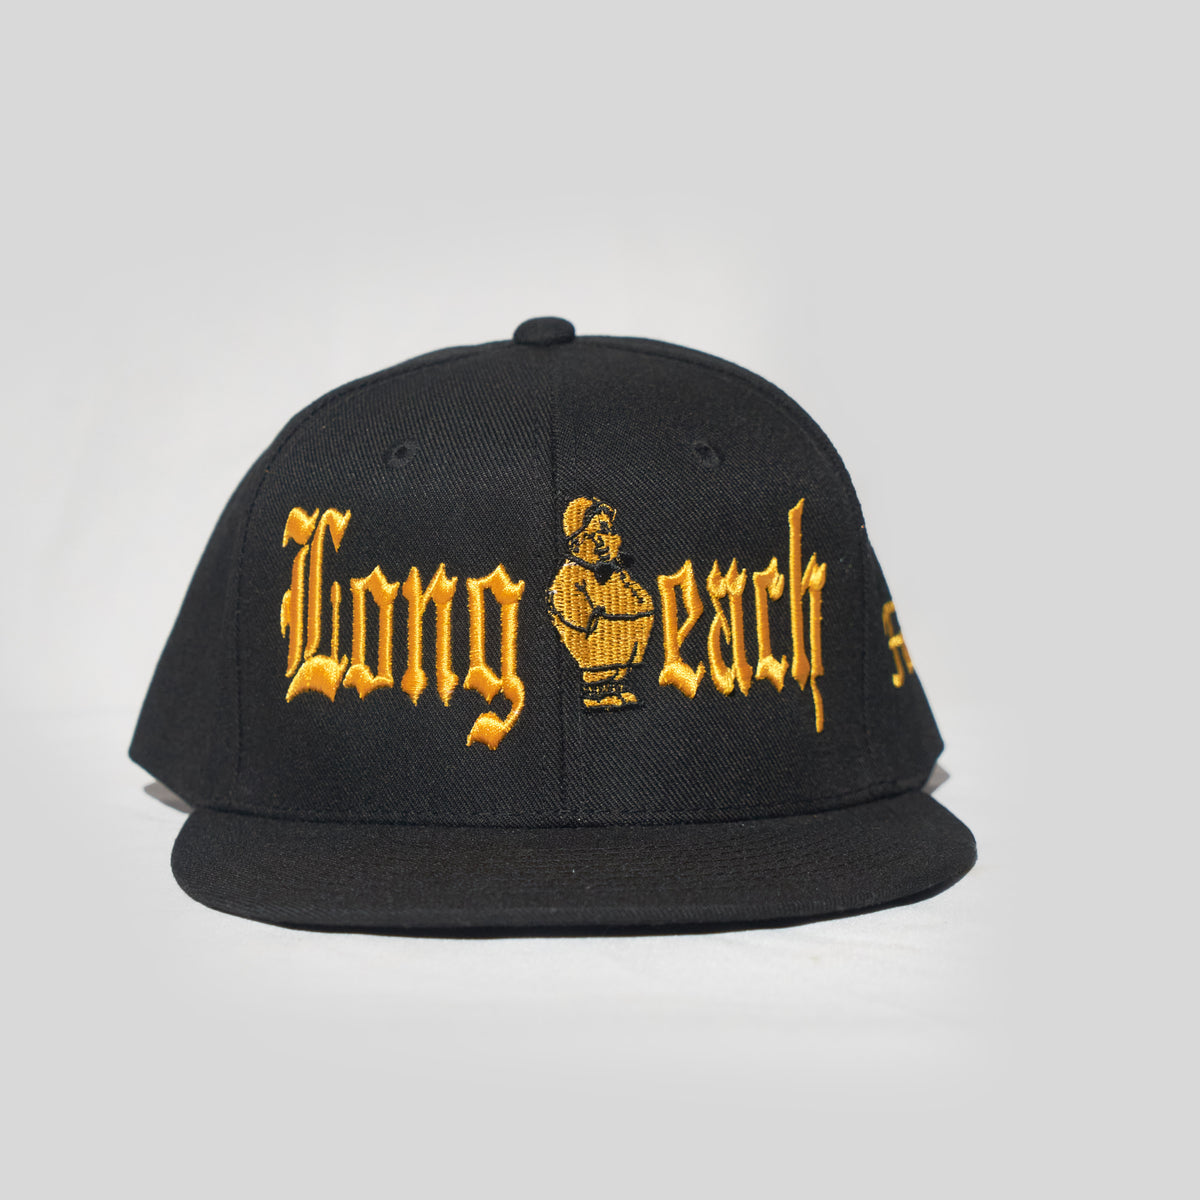 Long Beach Hat in Black and Gold